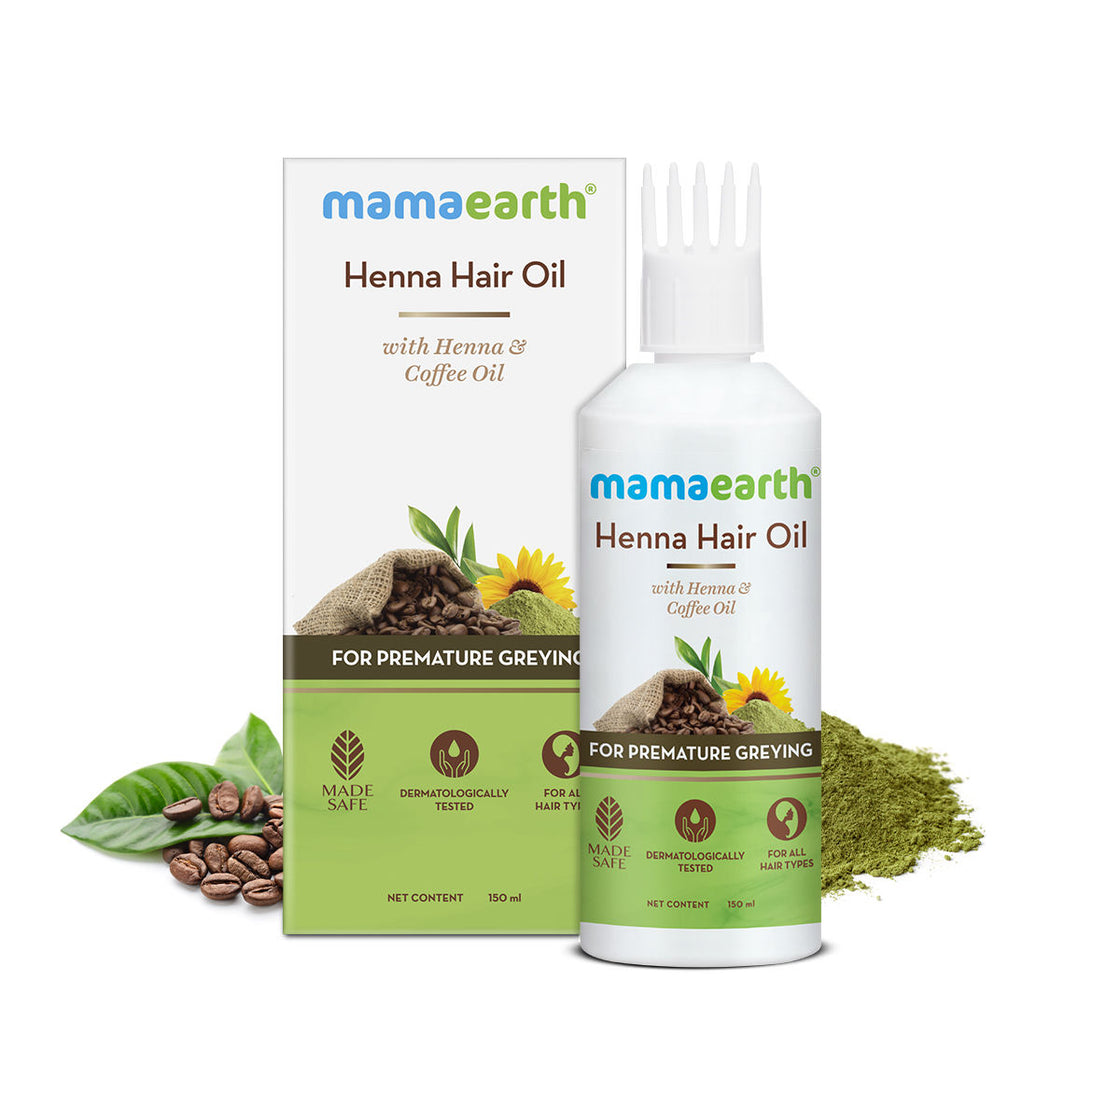 A Beautiful Life  Mamaearth Onion Hair Oil Review  AntiHairfall Product  With Onion Oil  Redensyl  Haircare Review  Beauty Review